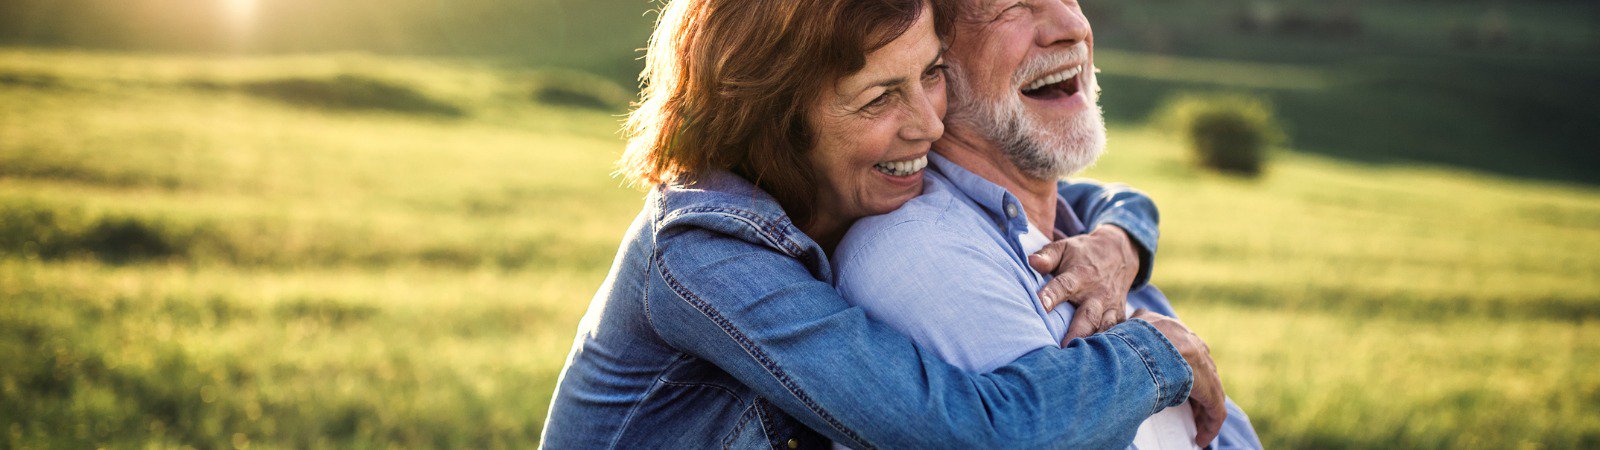 Mature man and woman hugging smiling in field